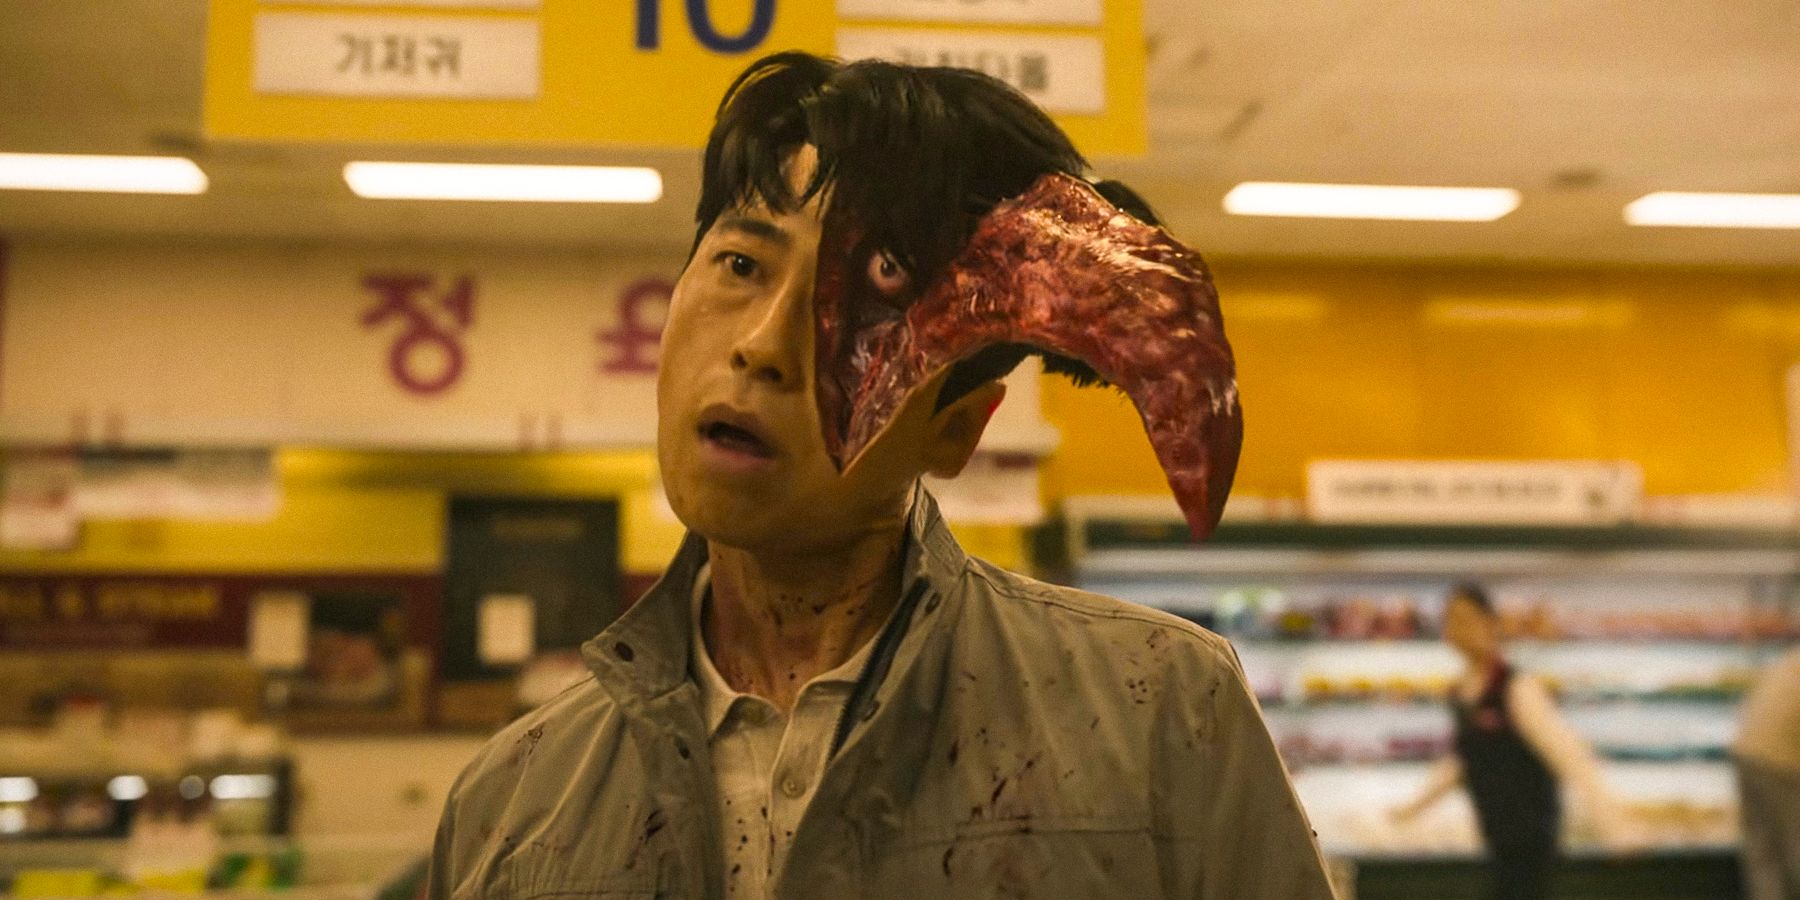 A man in the supermarket turns into a parasite in Parasyte: The Grey season 1 